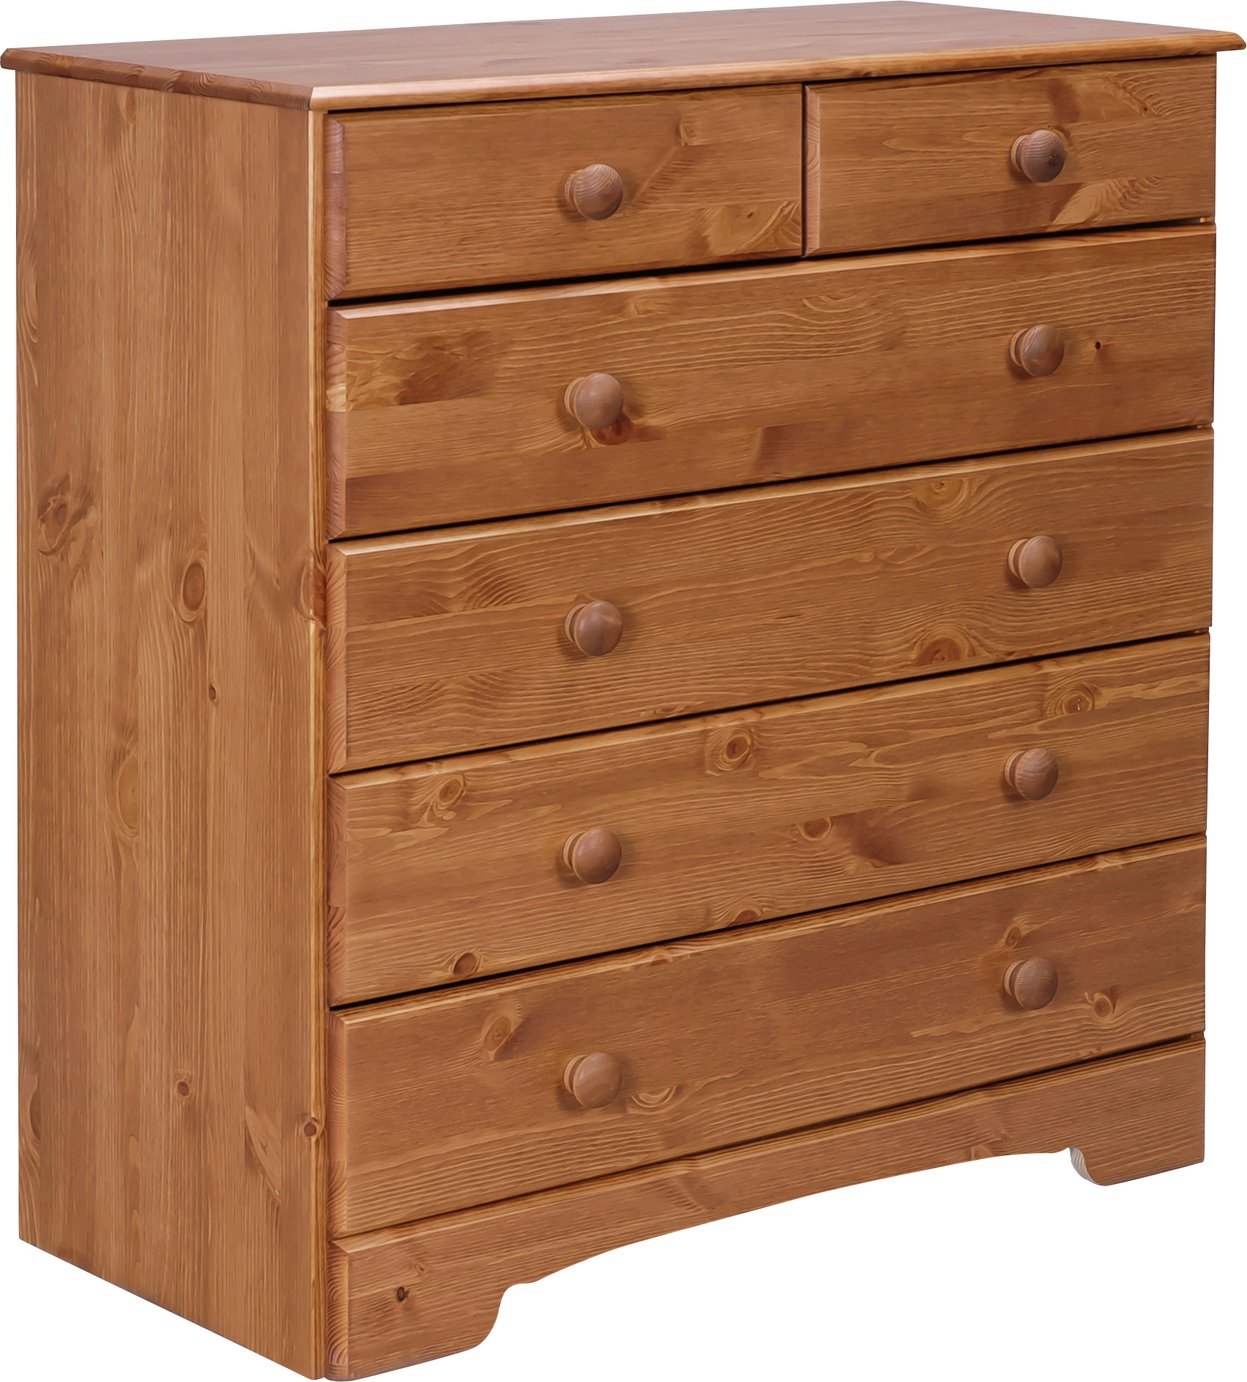 Argos Home Nordic 4 2 Drawer Chest of Drawers - Pine